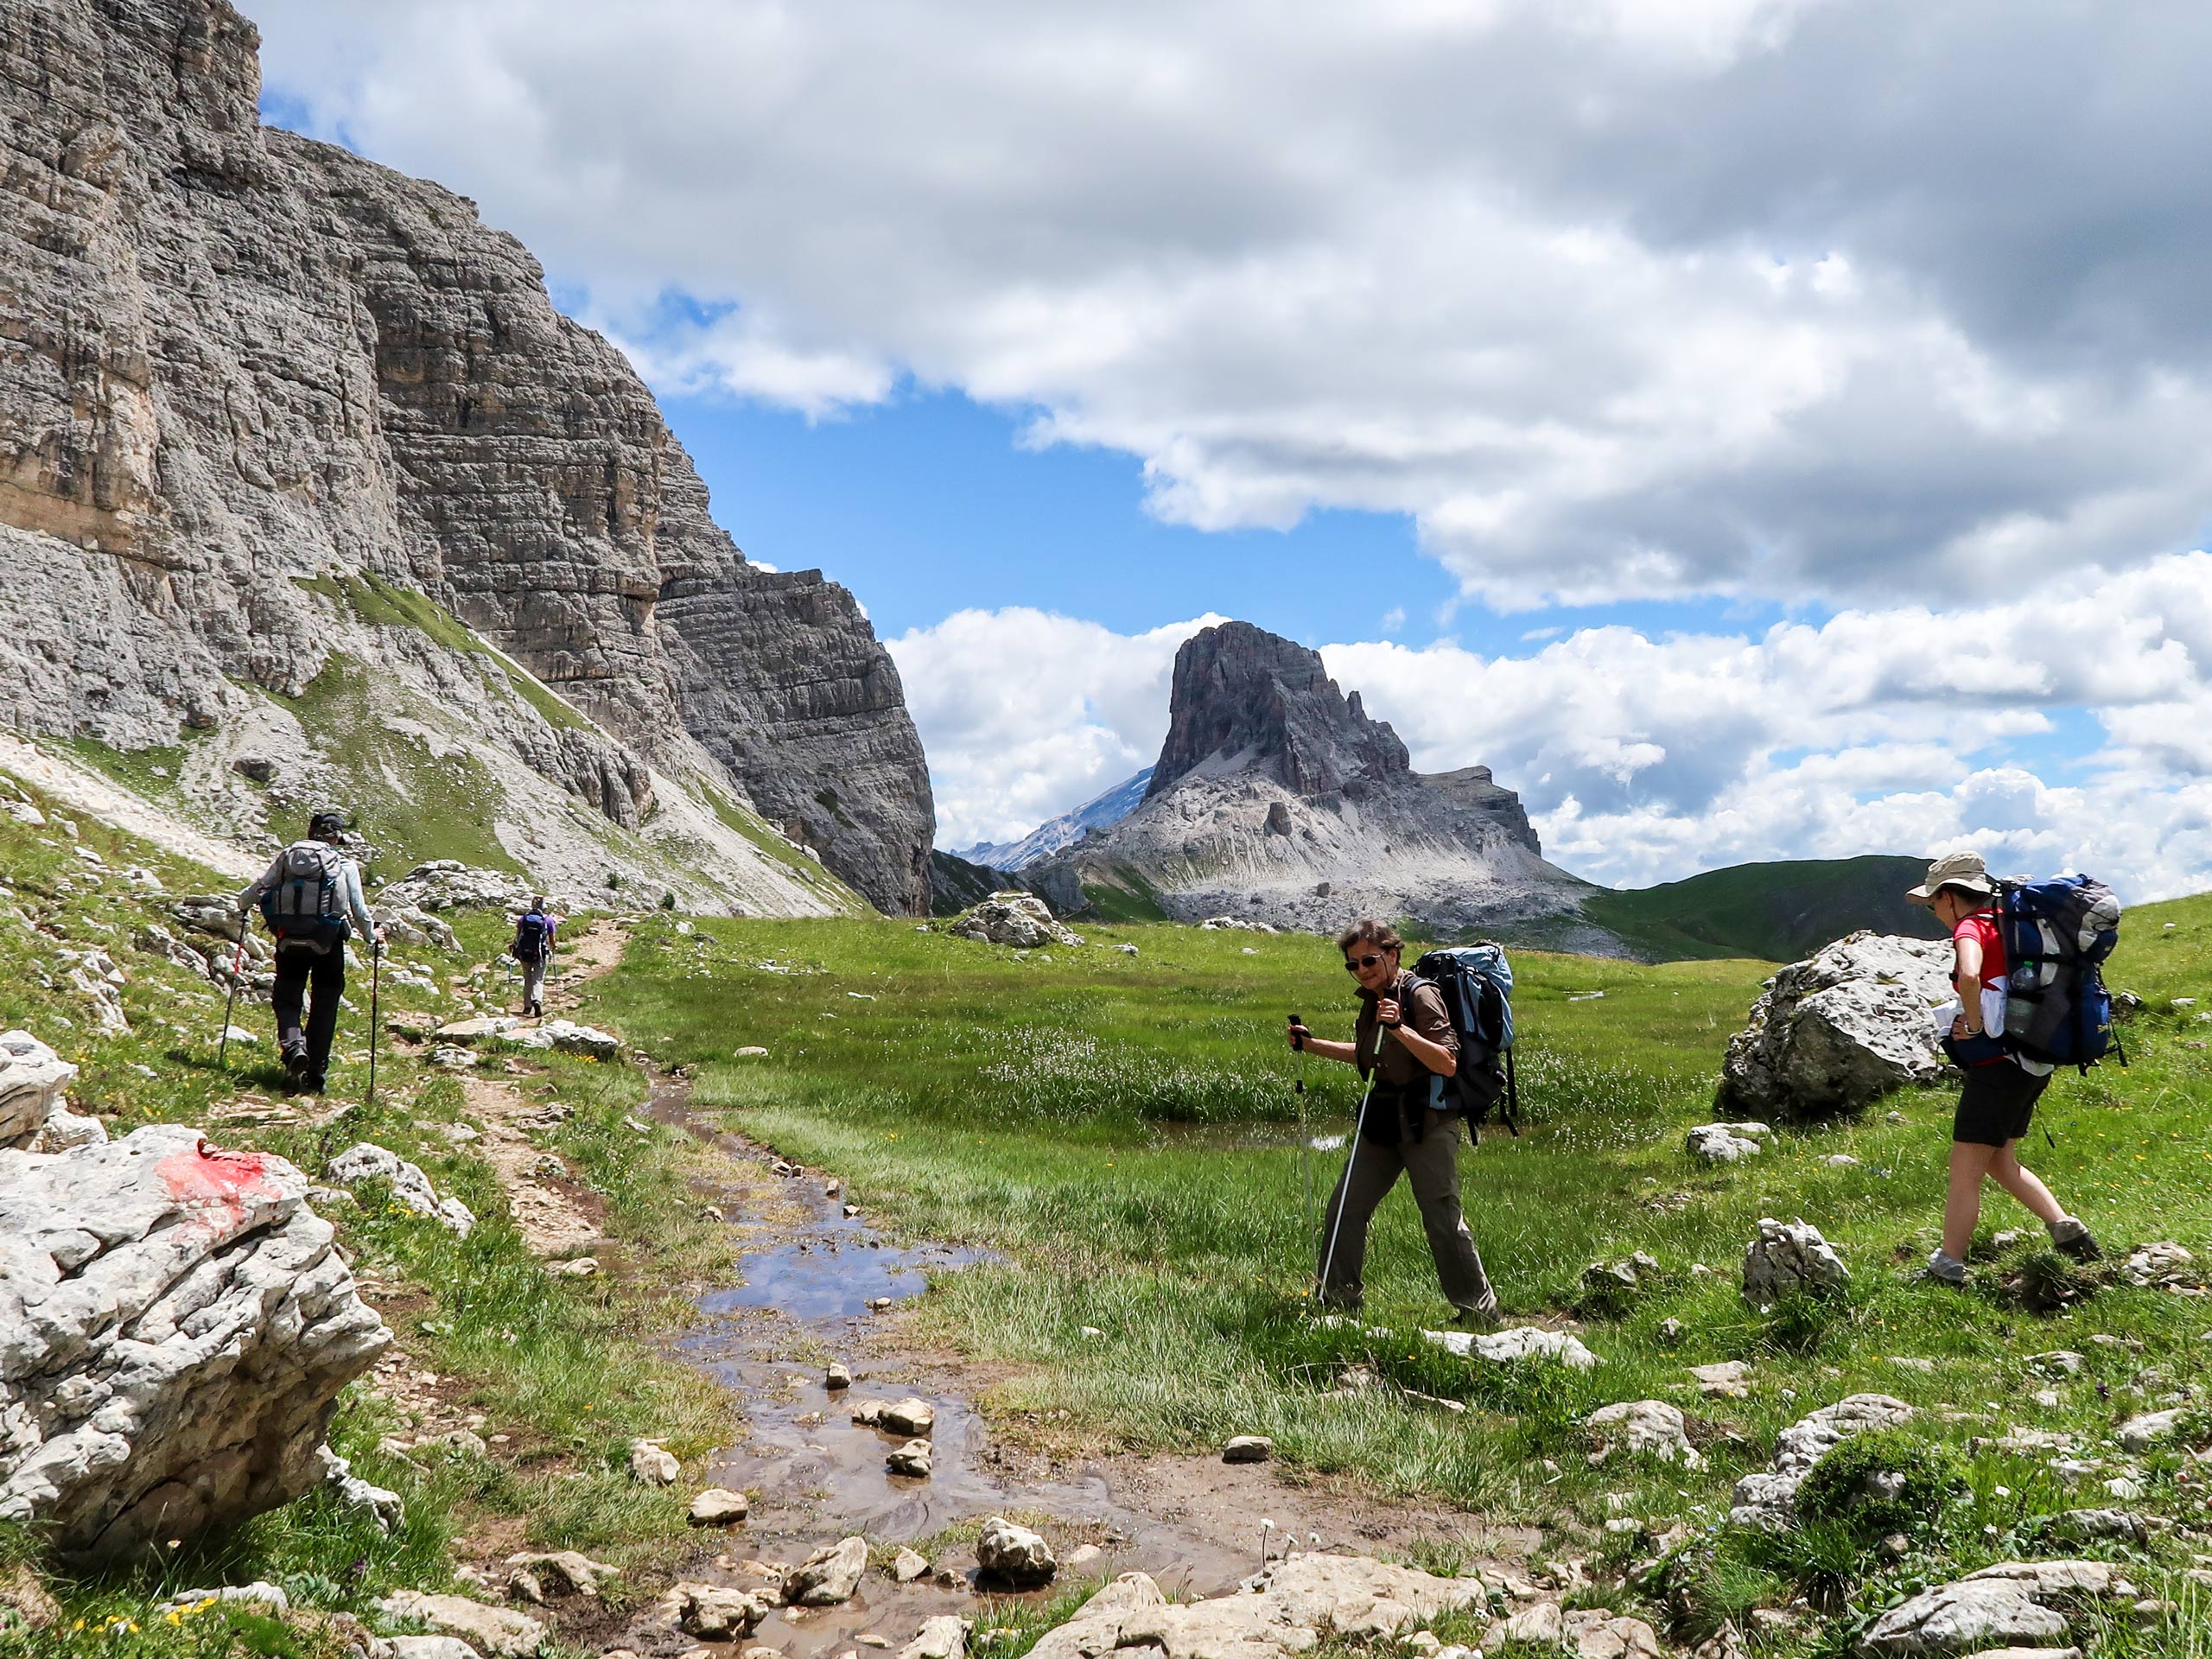 Group of tourists traveling in Dolomites mountains